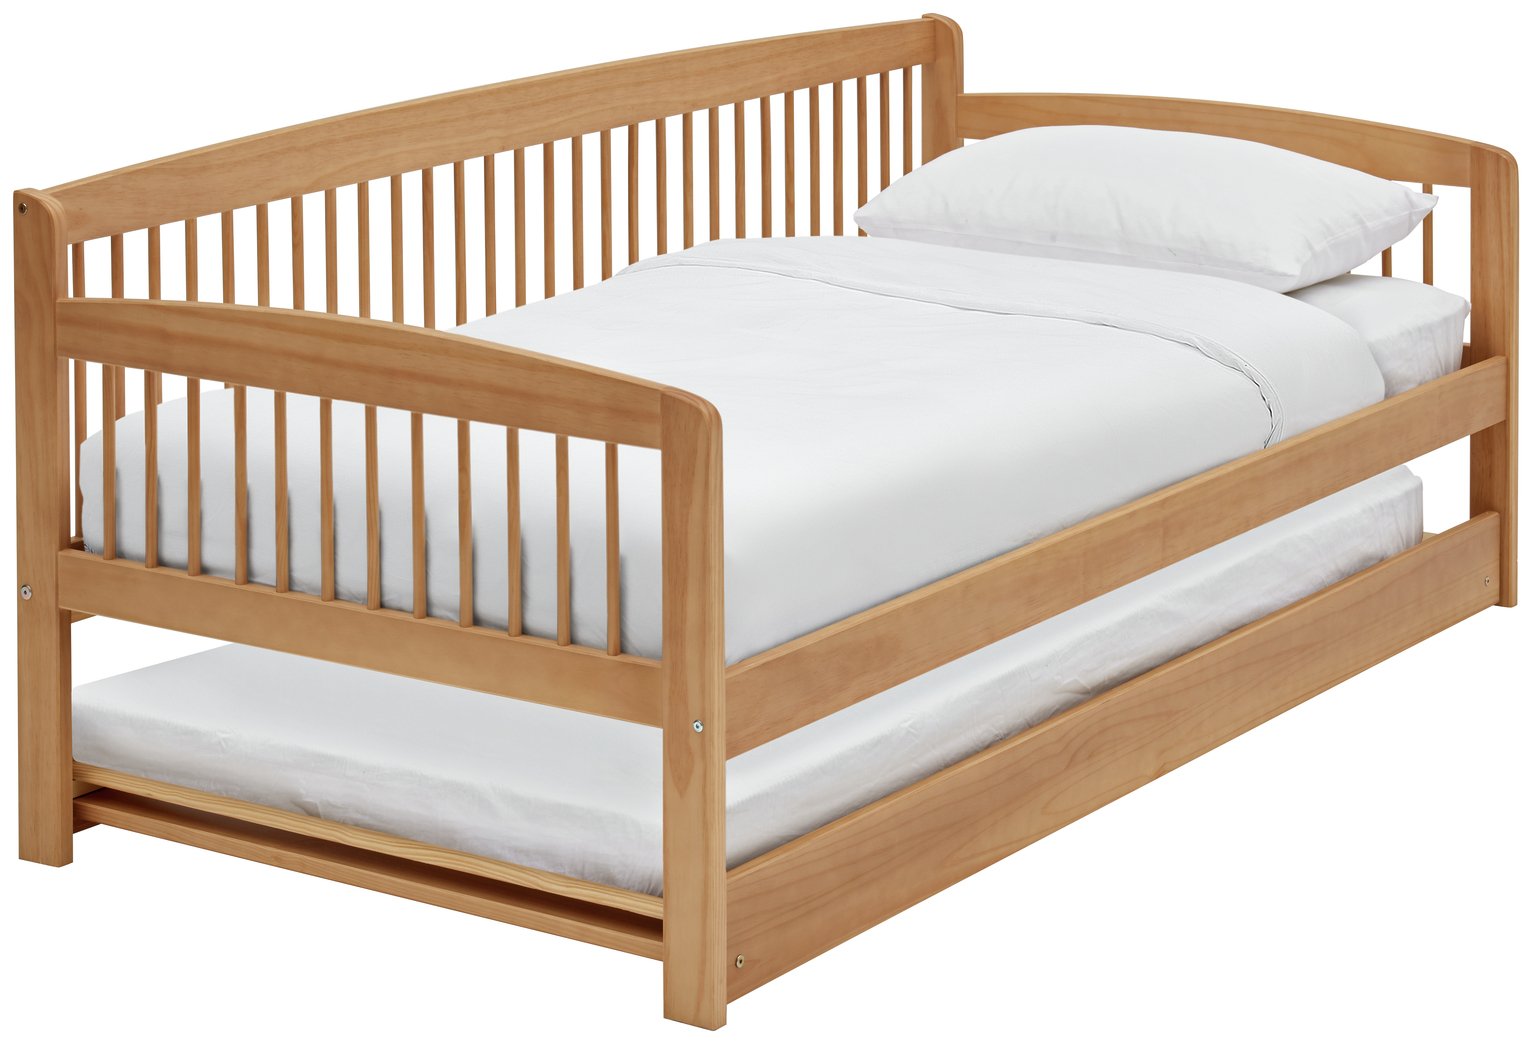 Argos Home Andover Wooden Day Bed with Trundle review